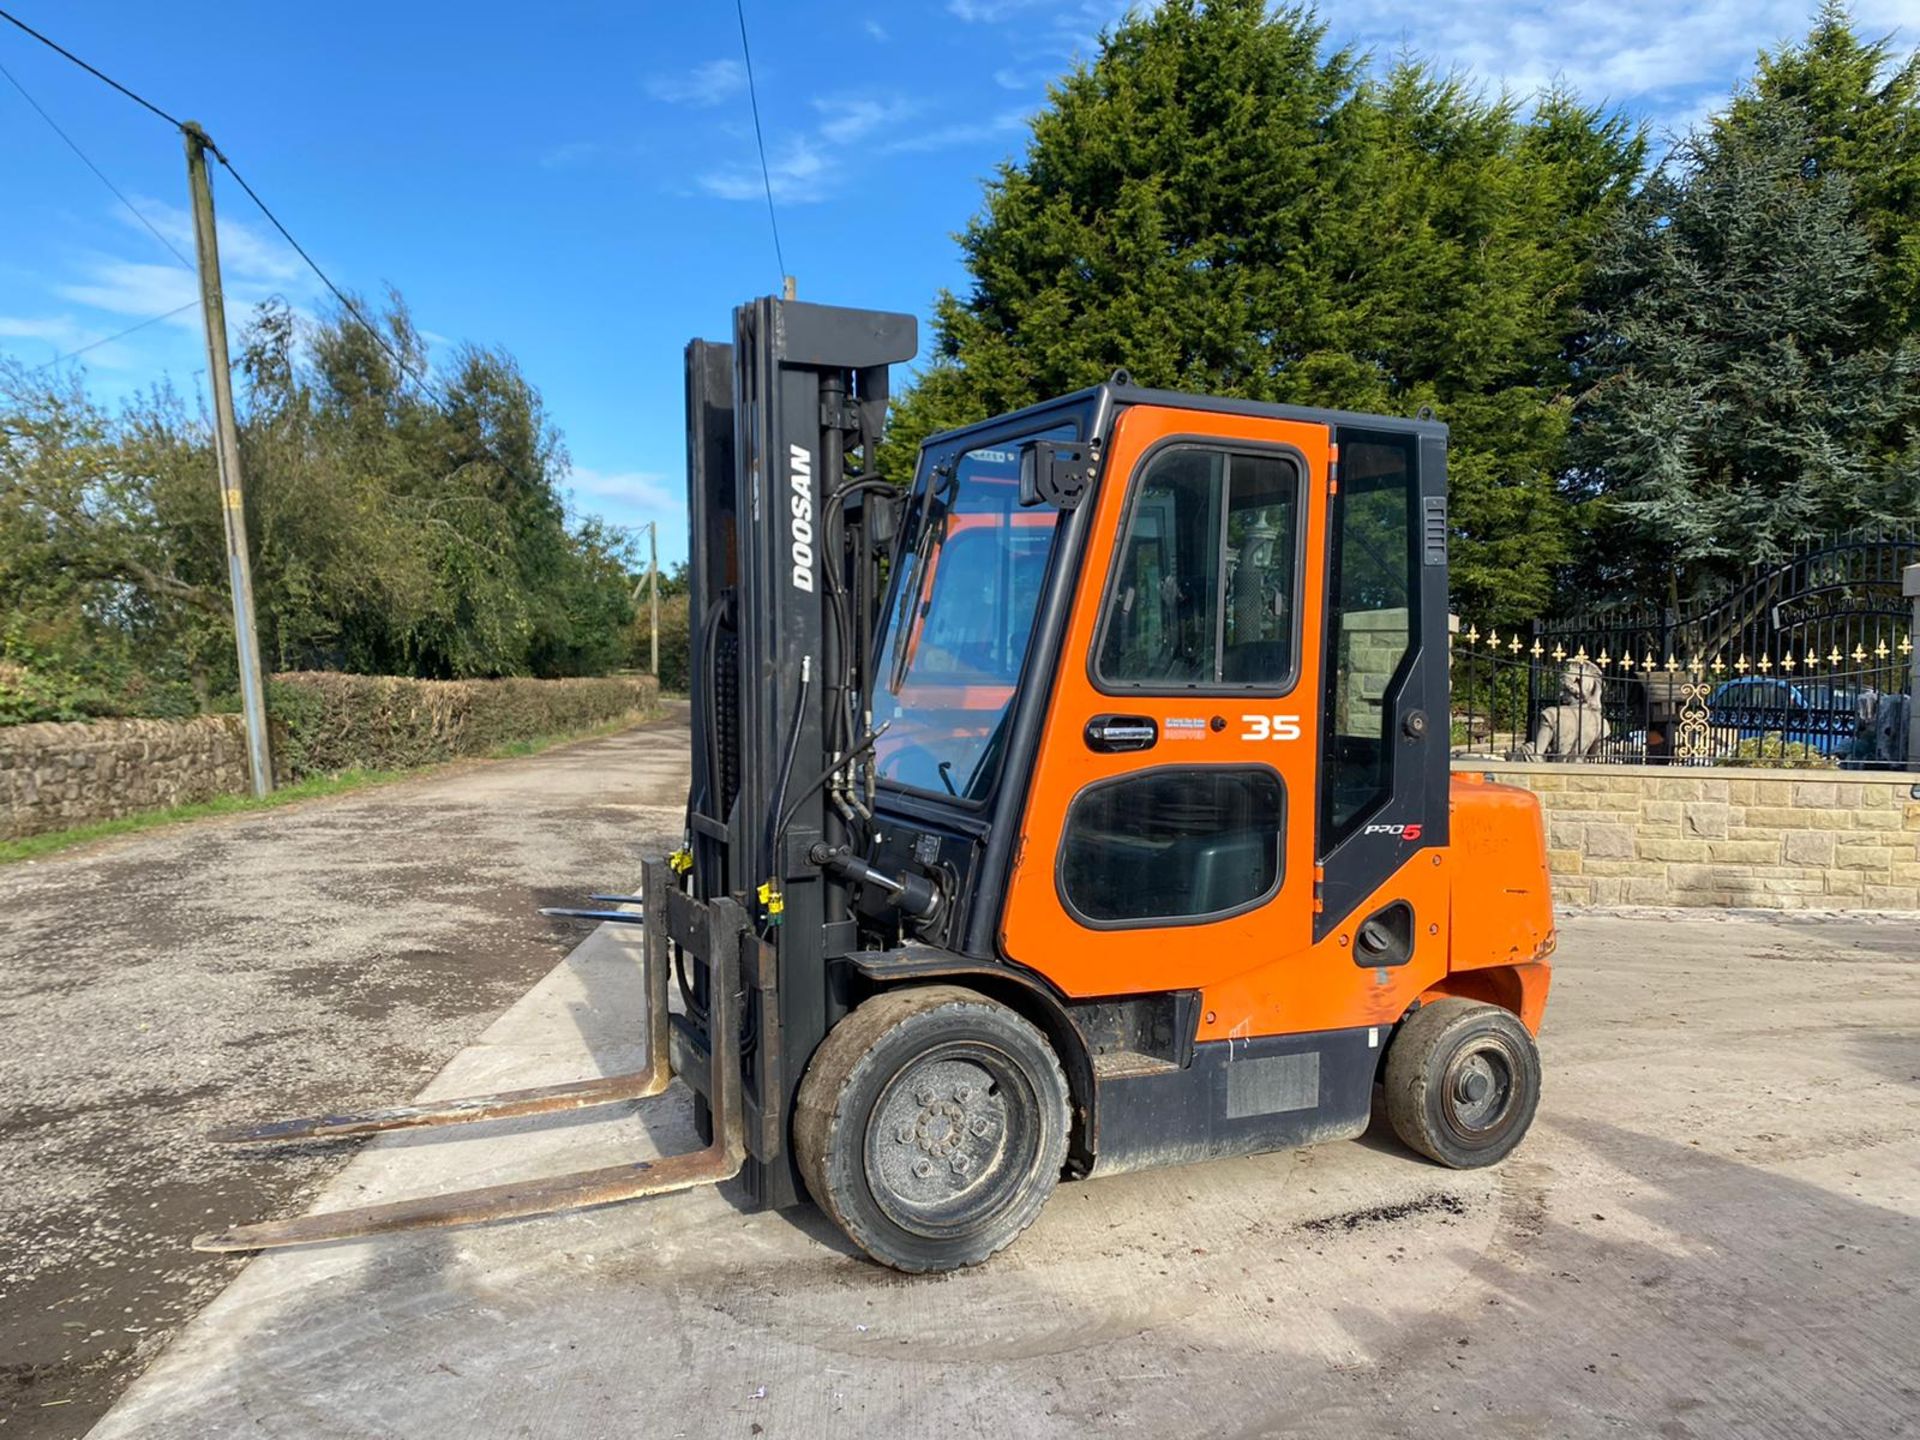 DOOSAN D3.5C-5 3 TON FORKLIFT, FULL GLASS CAB, YEAR 2012, IN GOOD CONDITION, RUNS, WORKS AND LIFTS - Image 5 of 13